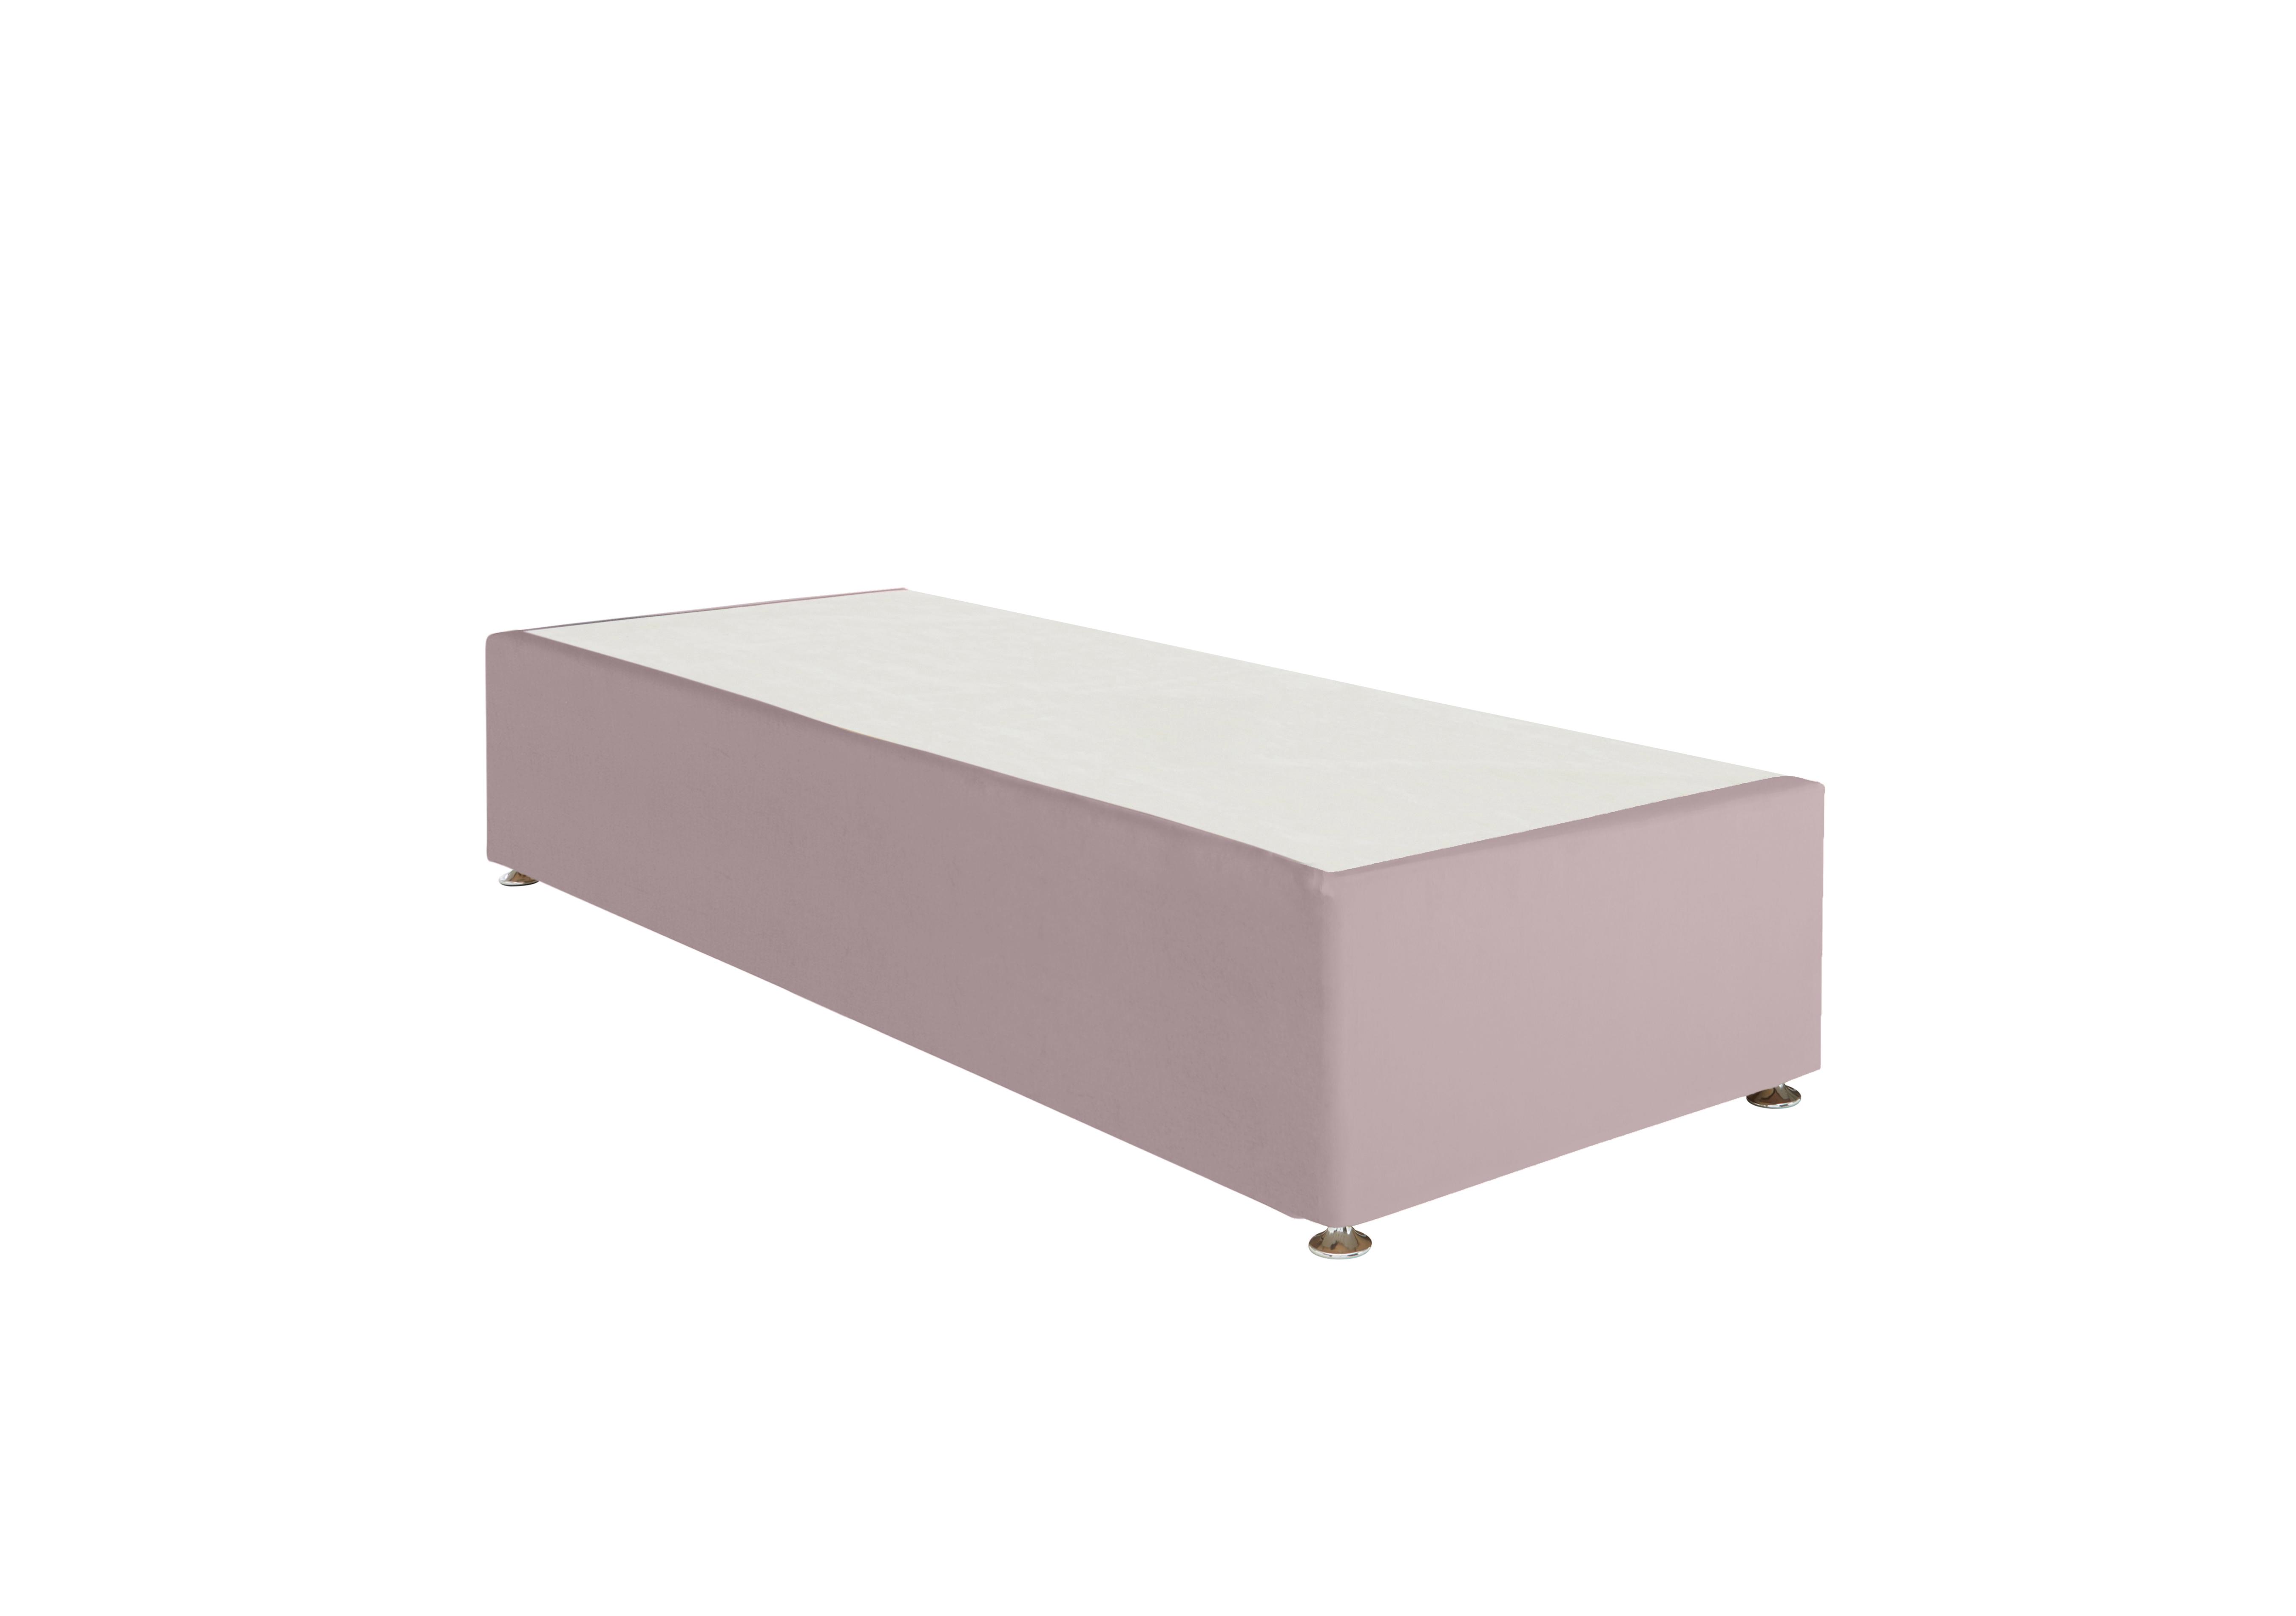 Divan Base with Drawers in Plush Lilac on Furniture Village